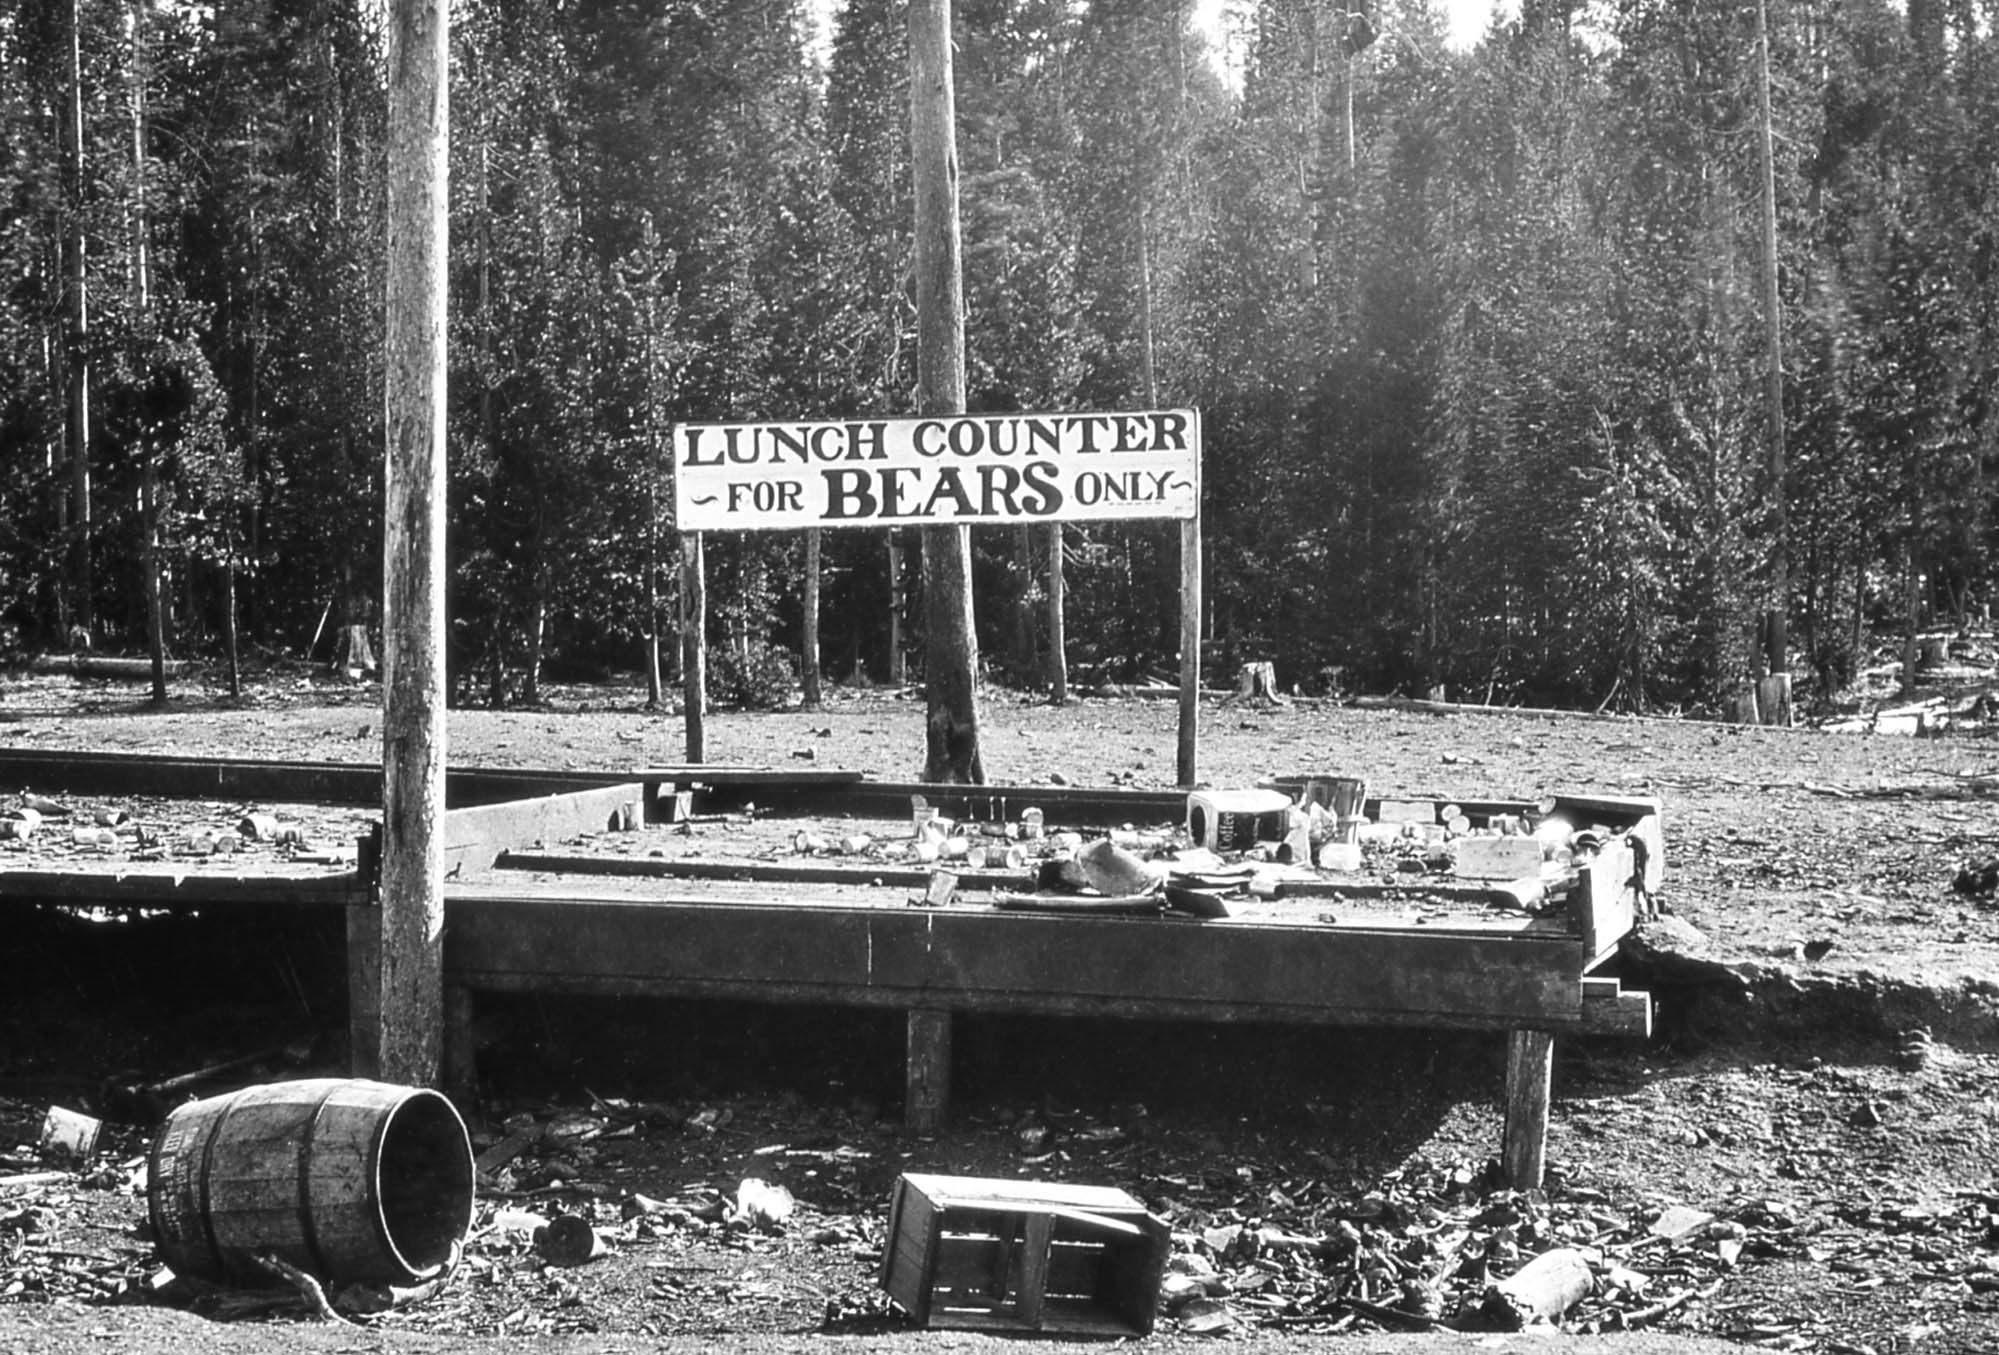 A platform with garbage on it and a sign that says, "Lunch counter for bears only."
